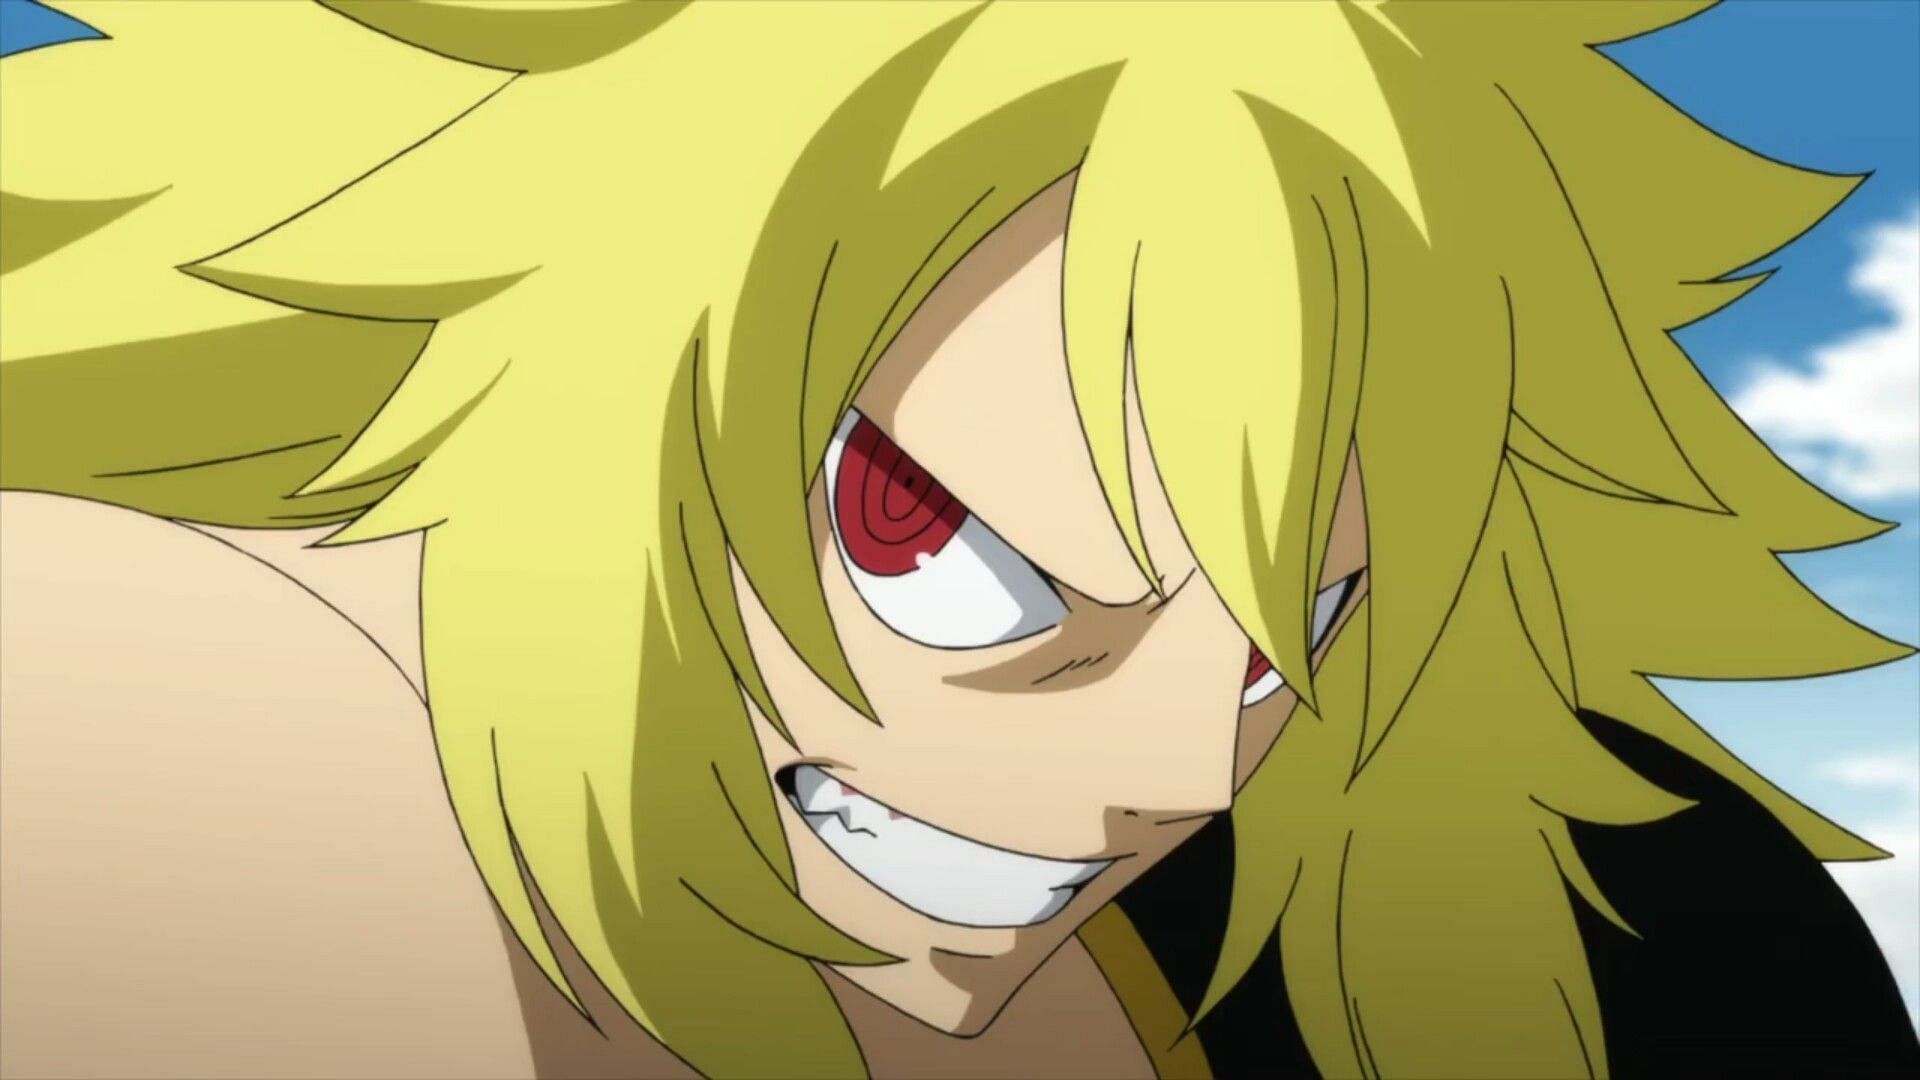 Zancrow from the anime Fairy Tail (Image via Studio A-1 Pictures)